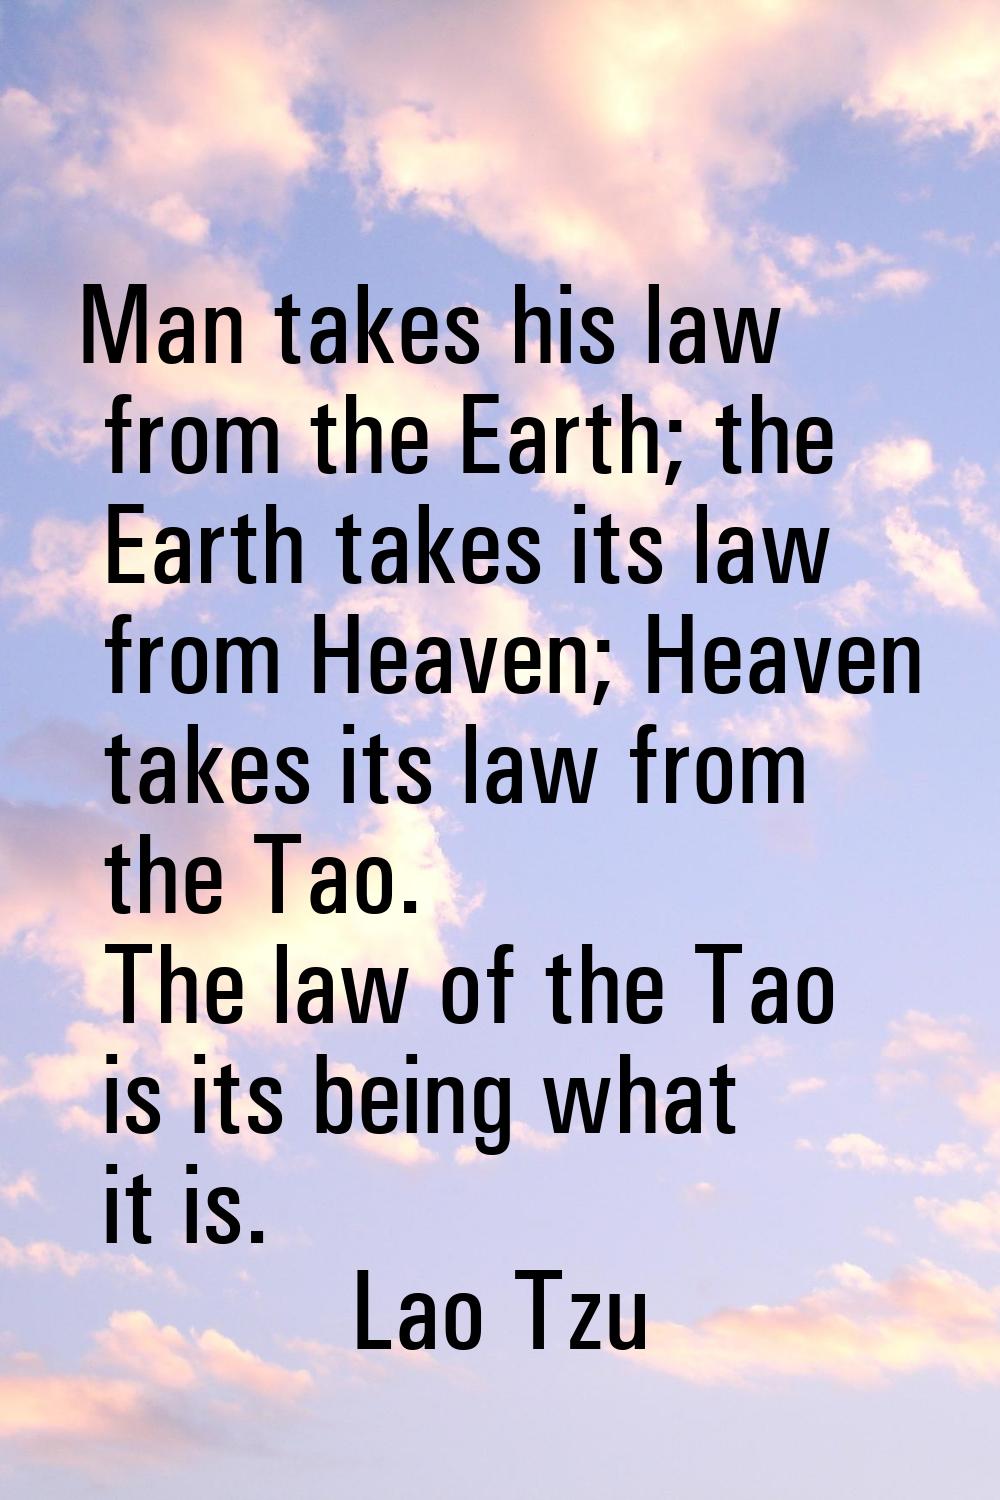 Man takes his law from the Earth; the Earth takes its law from Heaven; Heaven takes its law from th